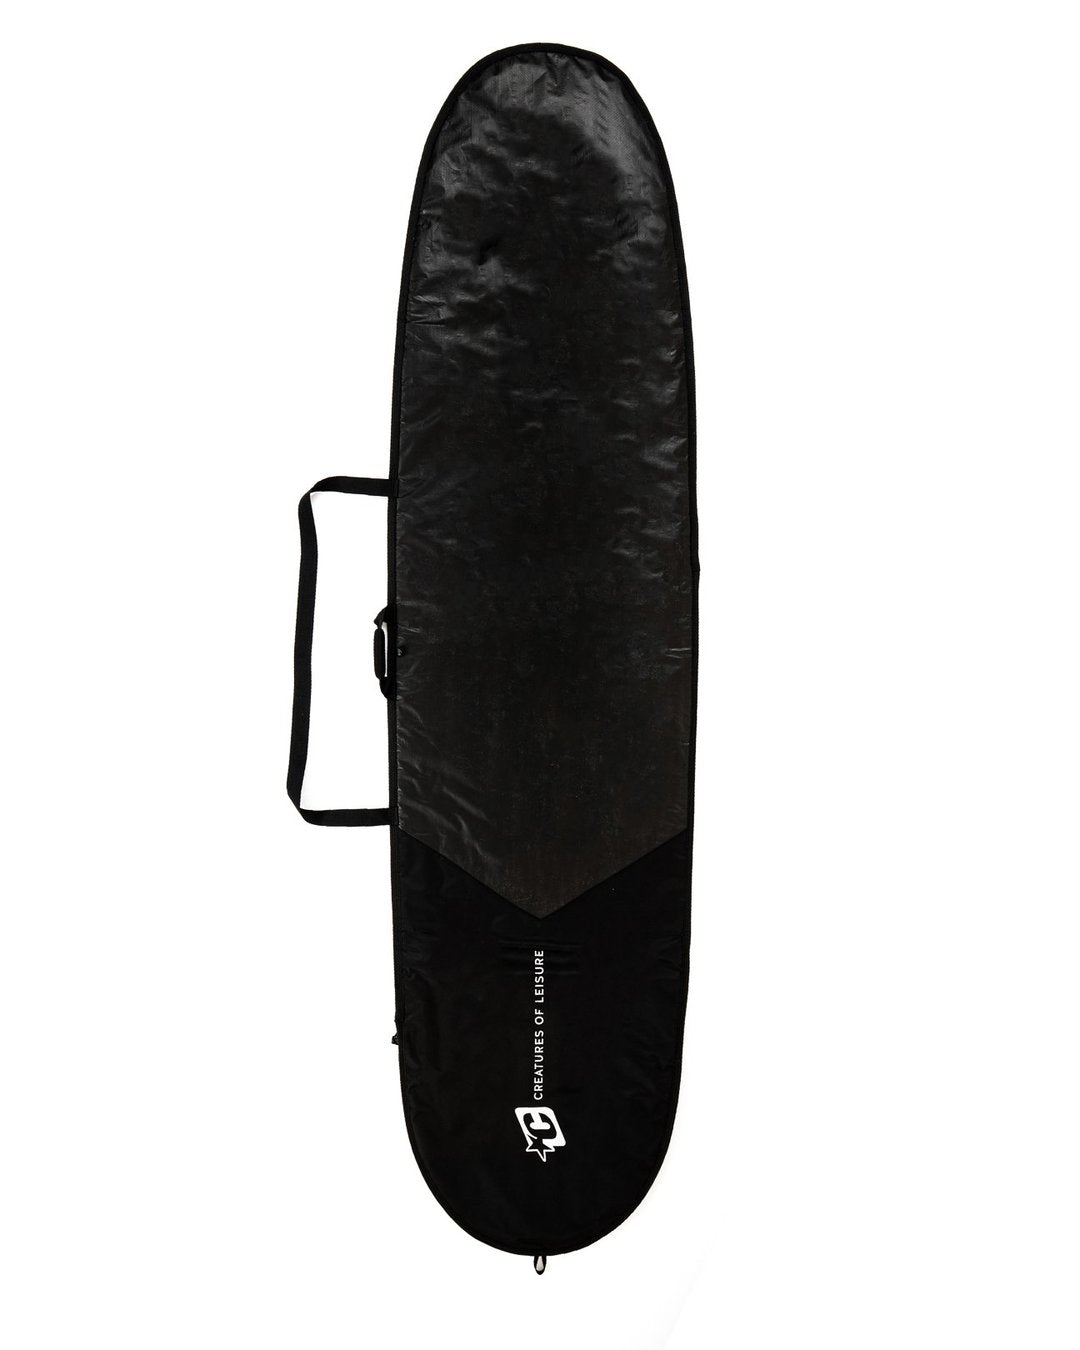 CREATURES LONGBOARD ICON LITE COVER - Star Surf + Skate